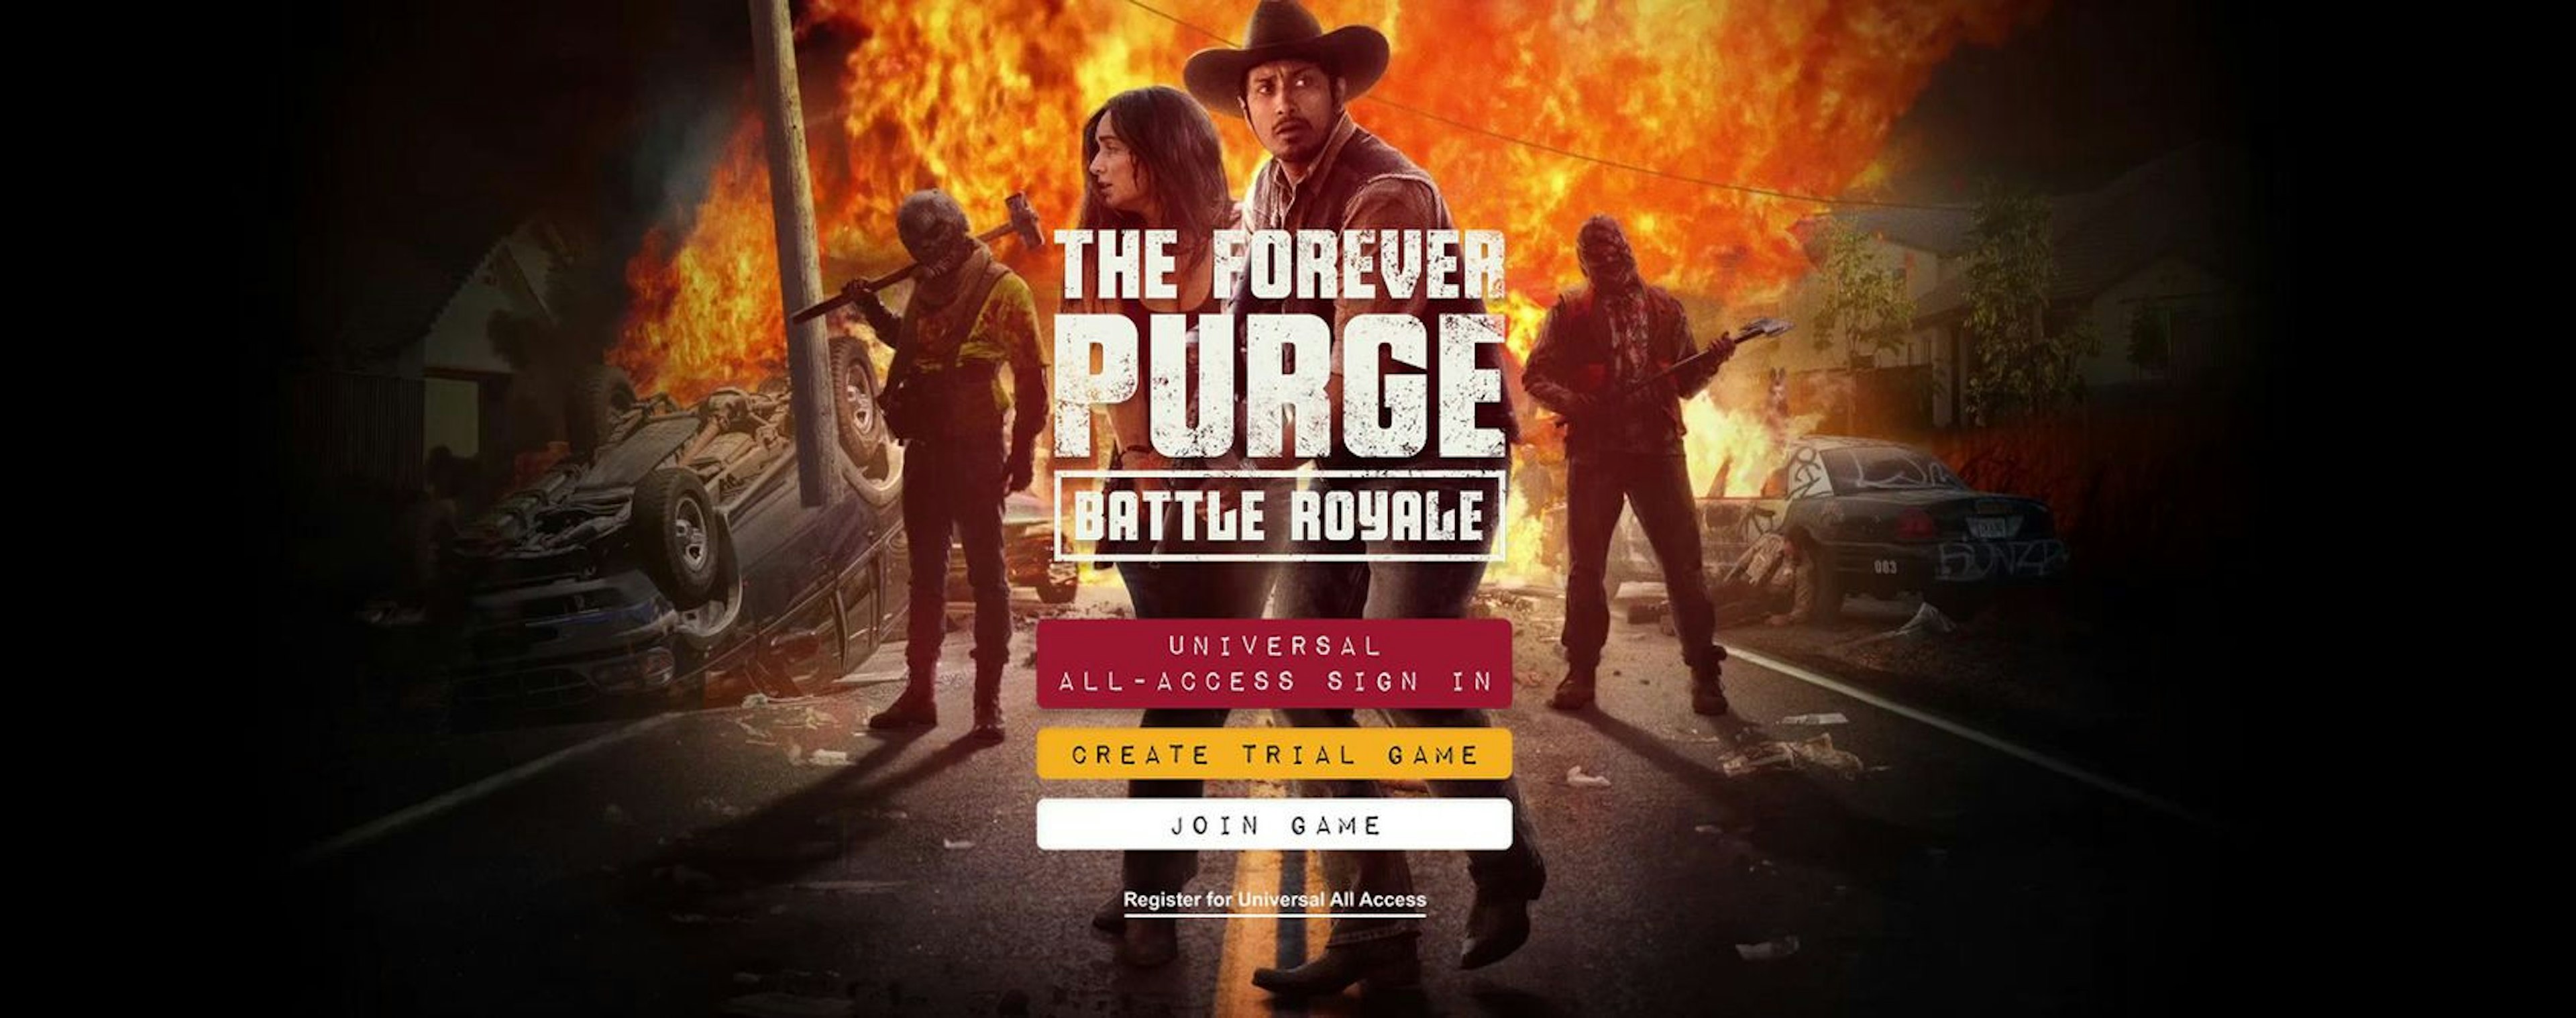 The Forever Purge - Battle Royale